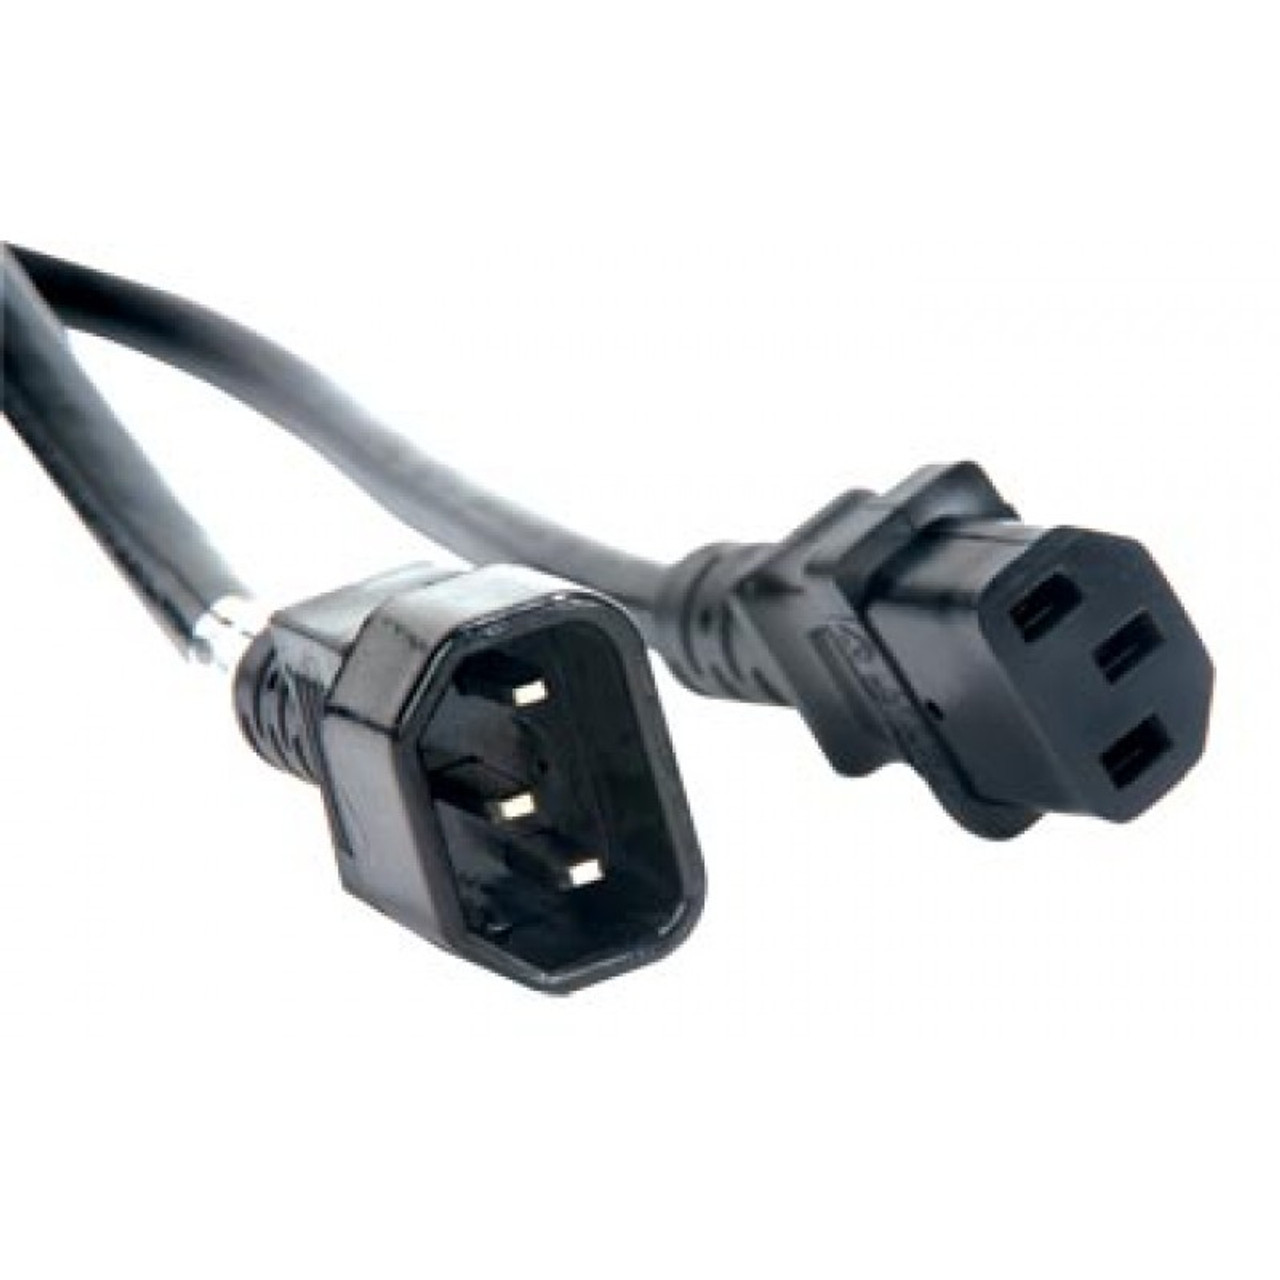 IEC Power Cable, 10